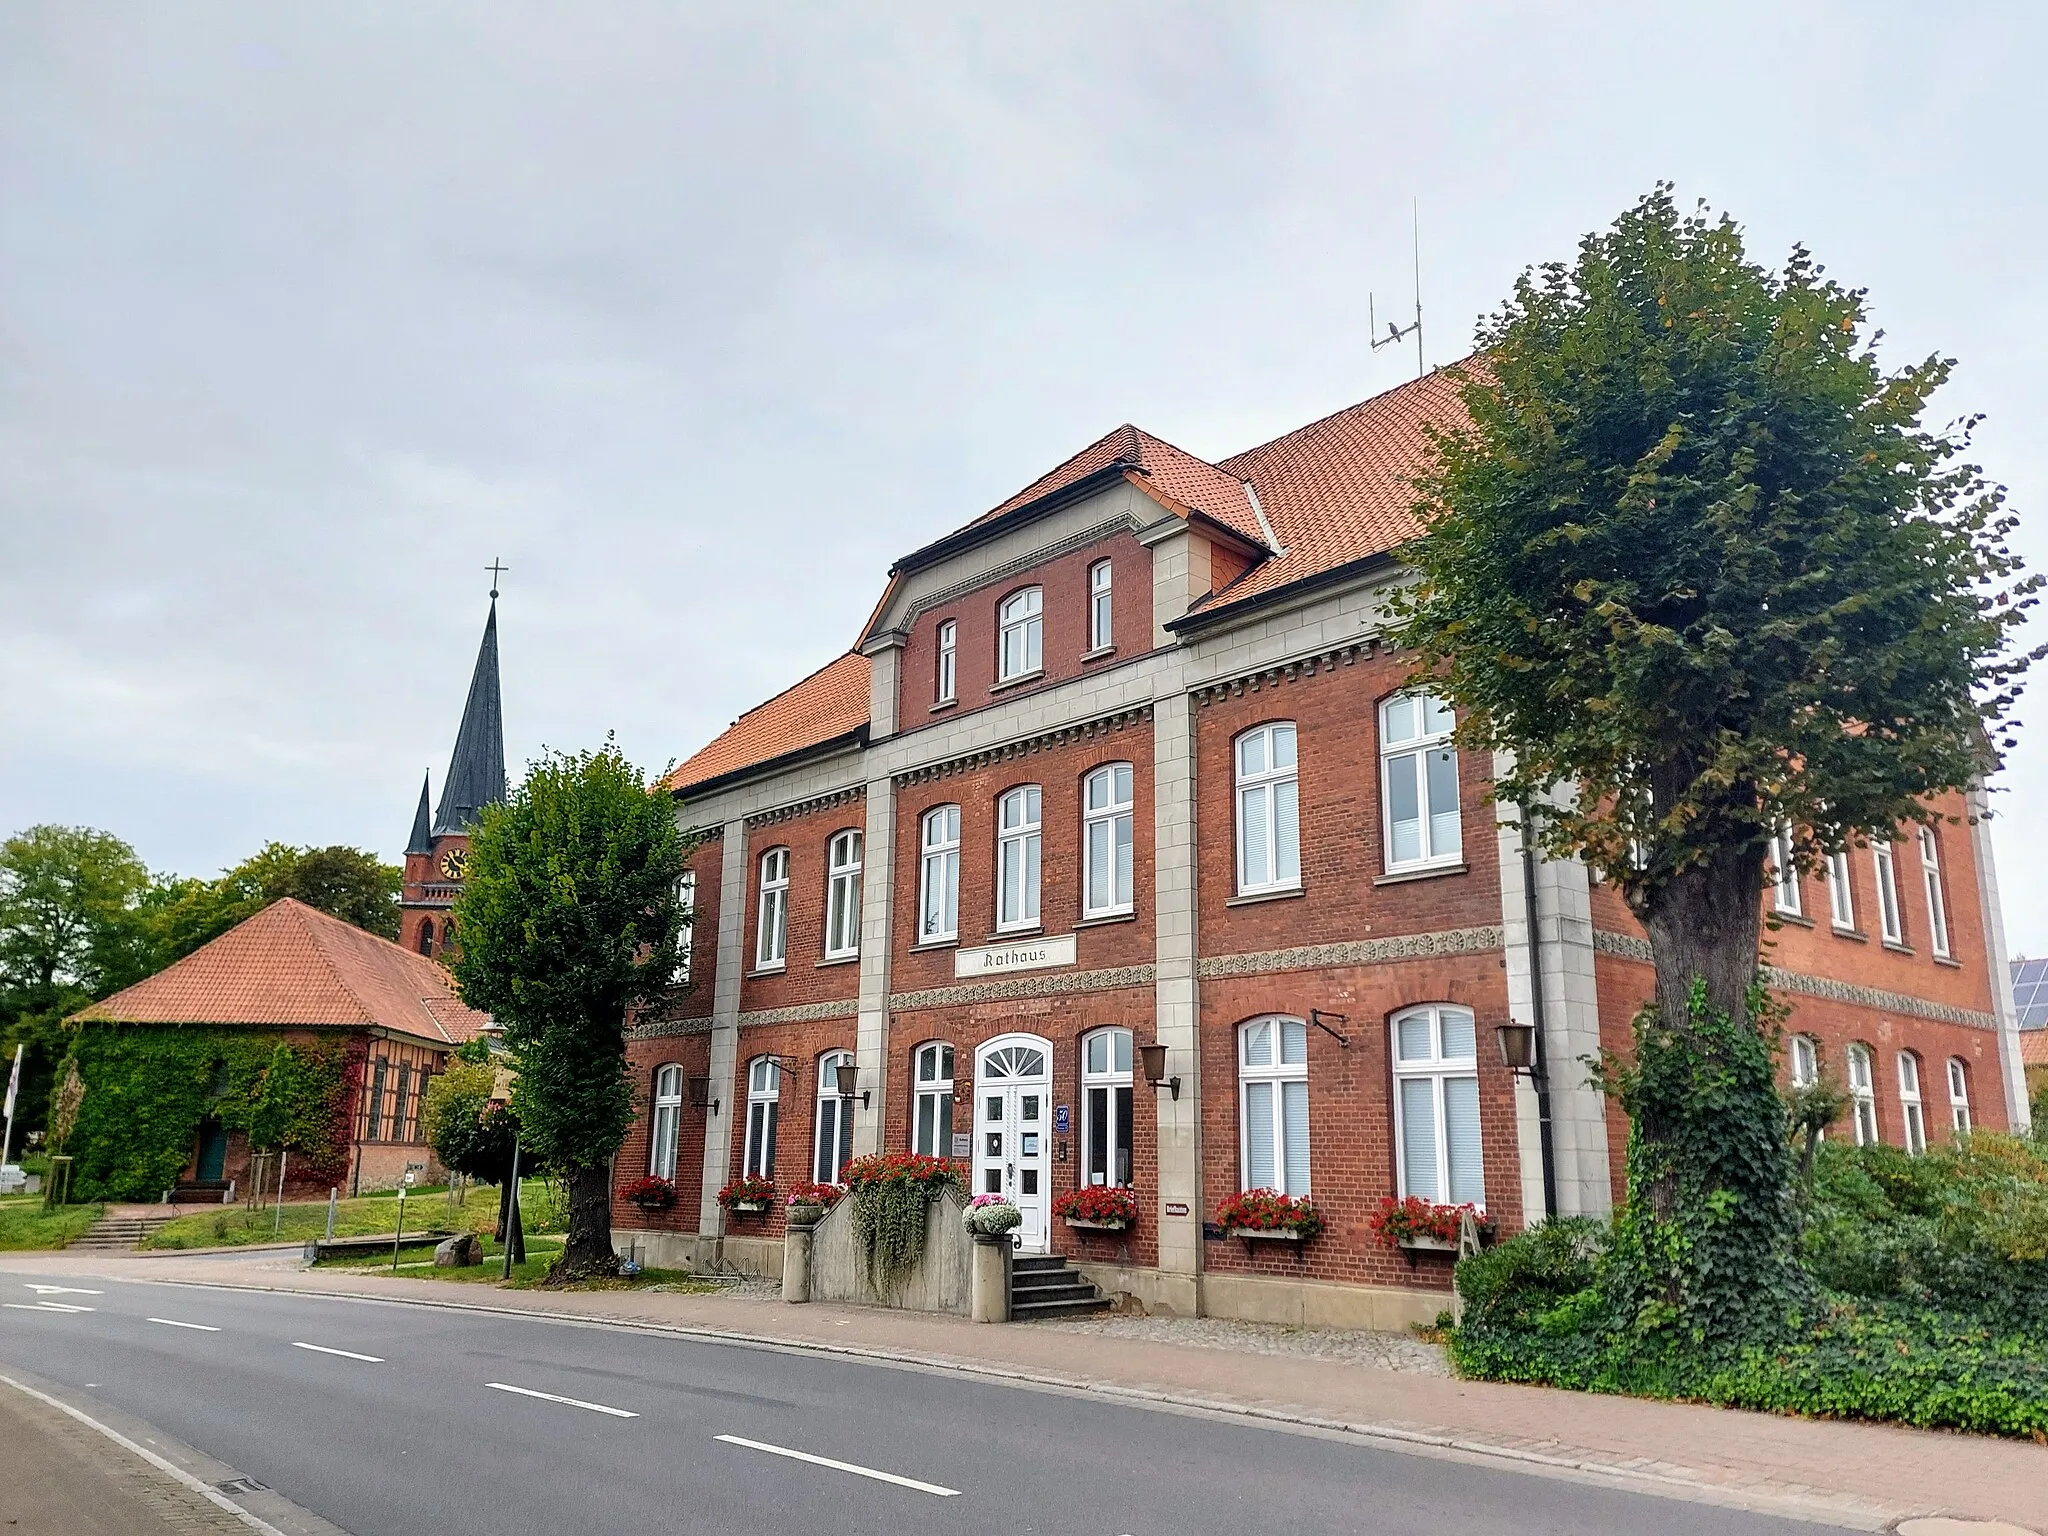 Photo showing: Townhall of Amelinghausen